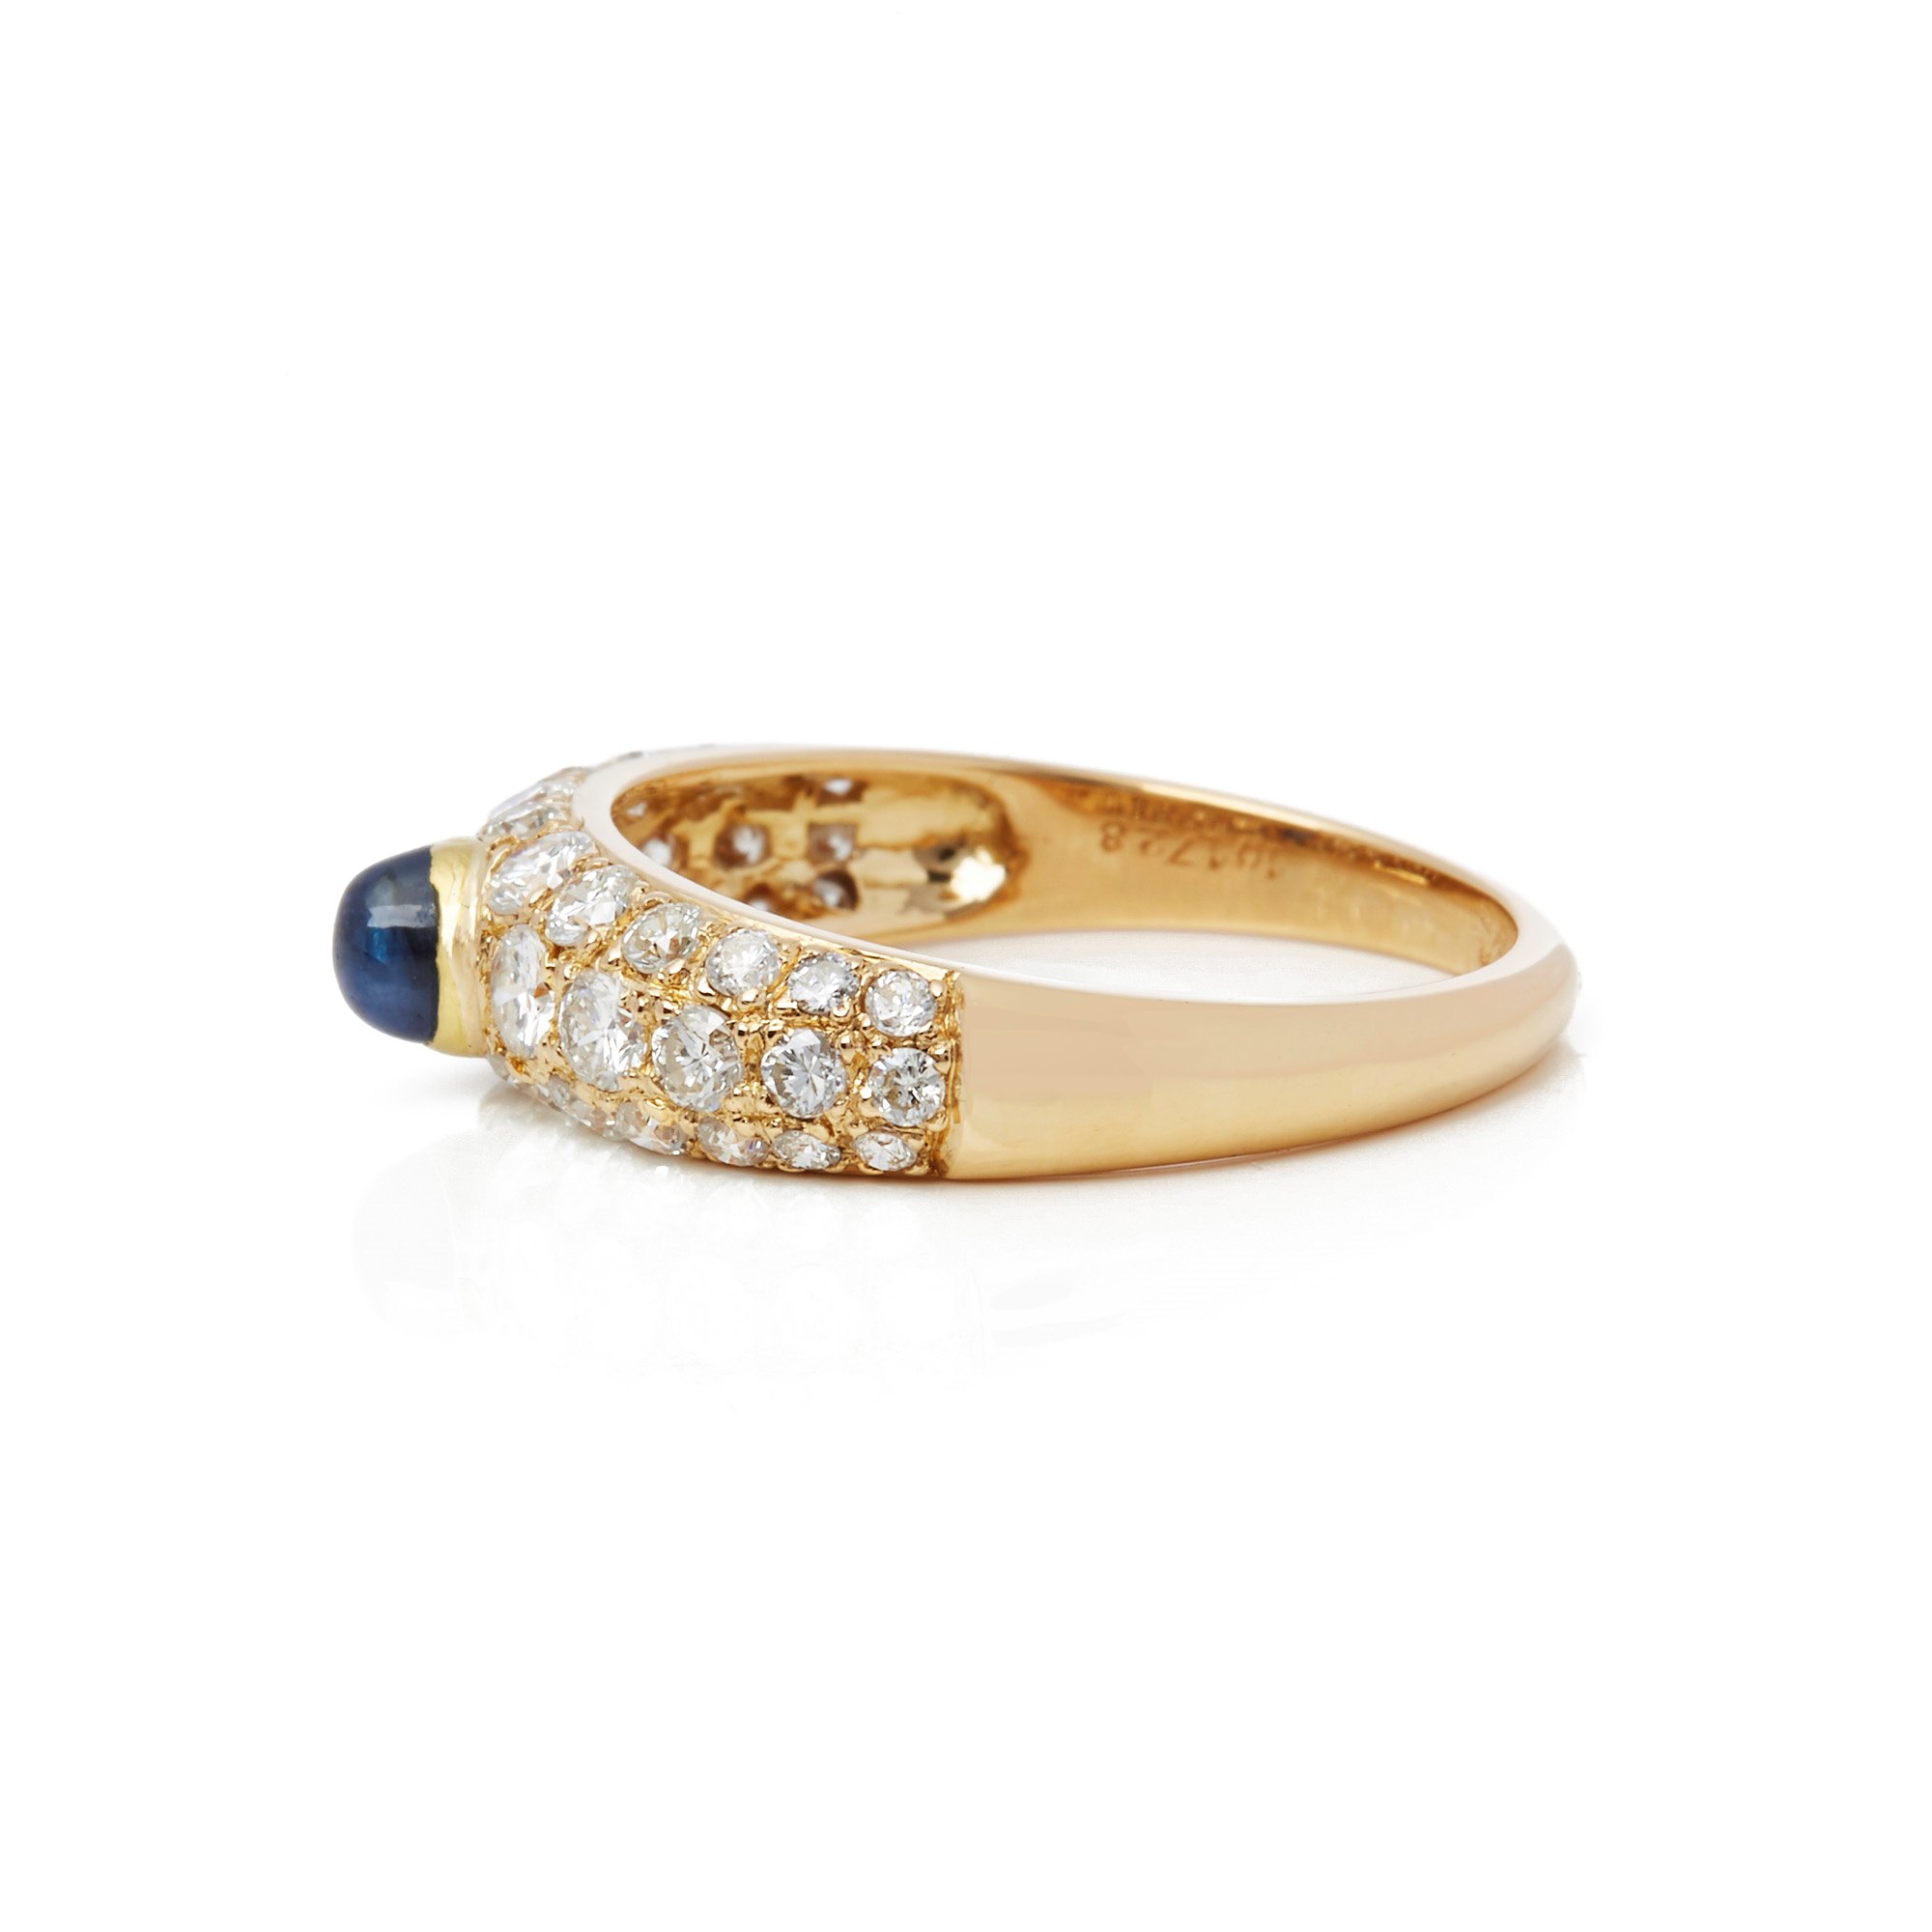 Cartier 18k Yellow Gold Cabochon Sapphire and Diamond Ring